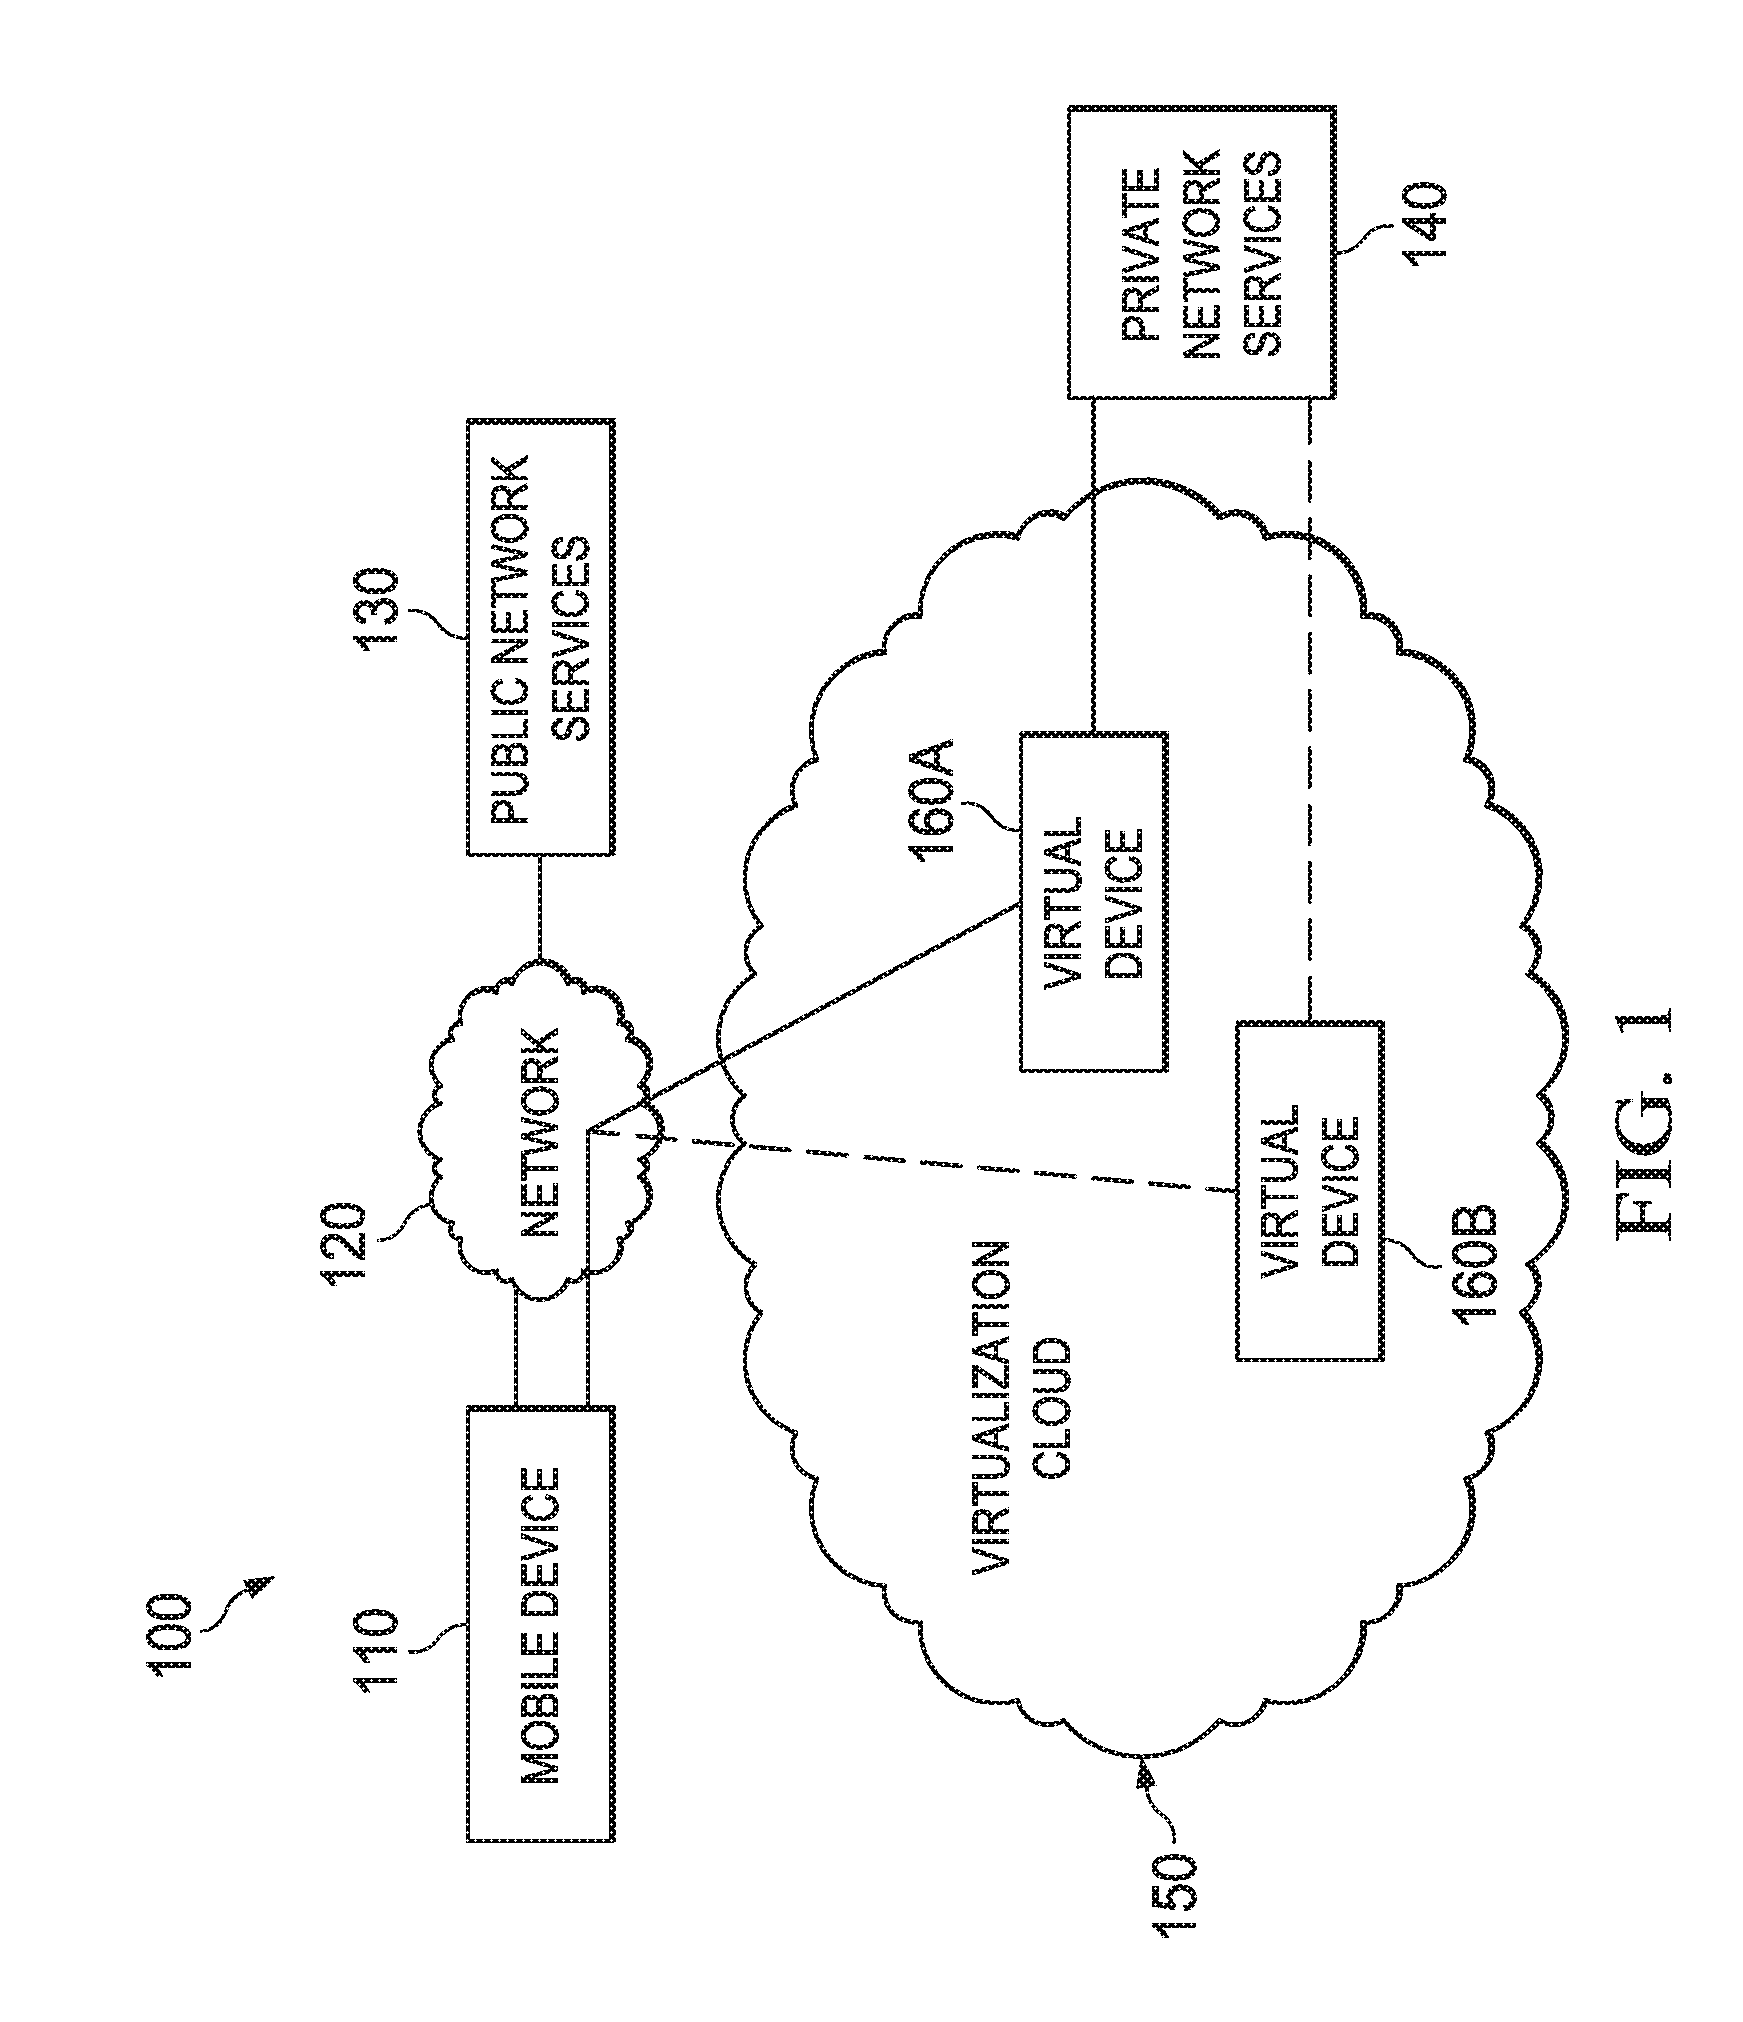 System, method and computer program product for connecting roaming mobile devices to a virtual device platform